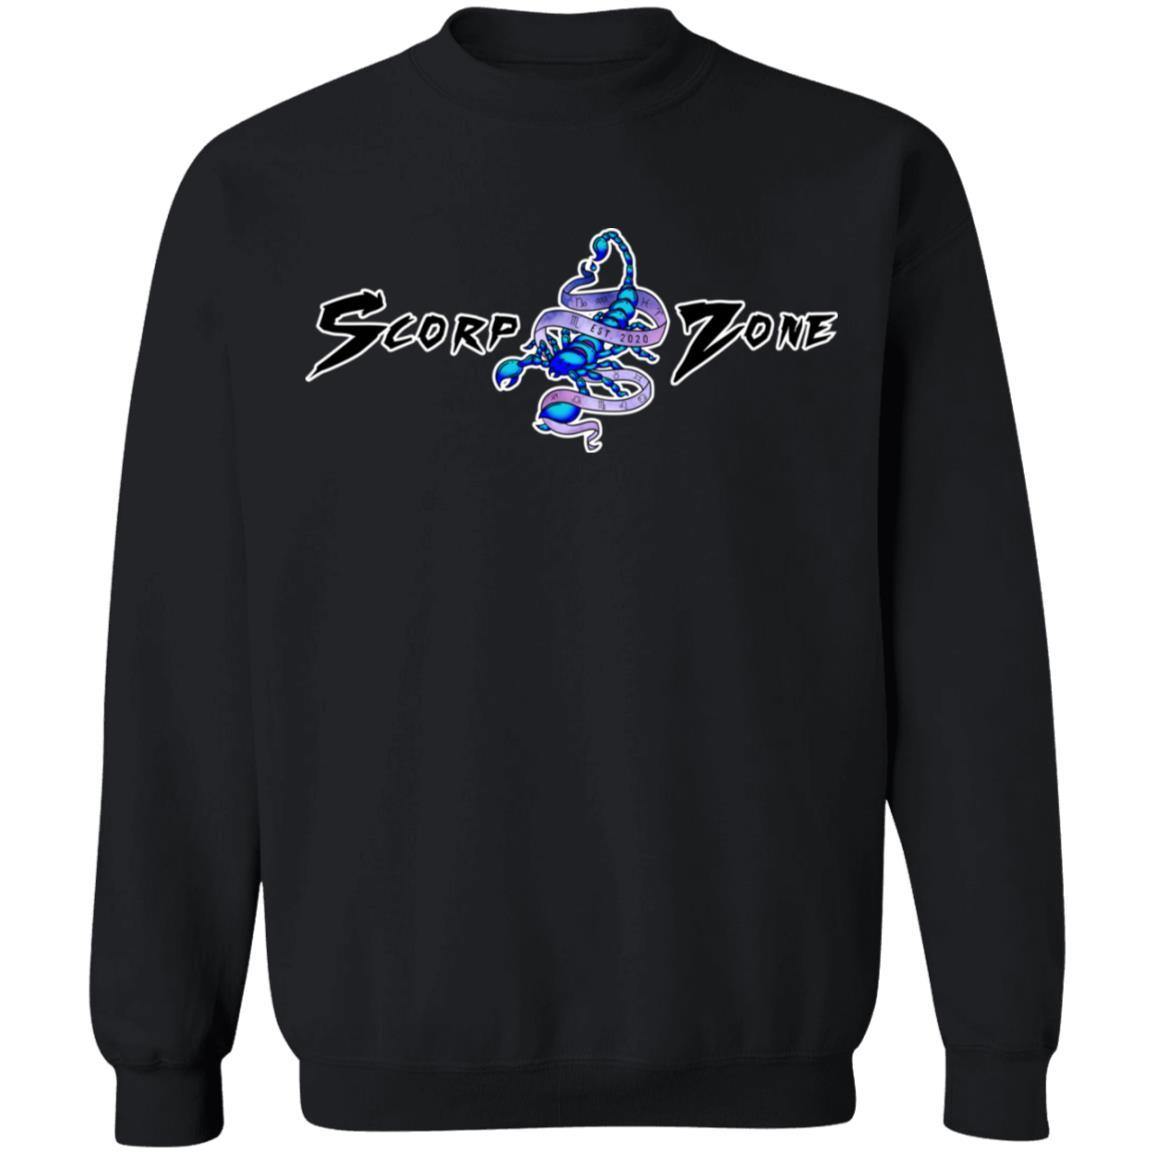 CANCER DESIGN ON BACK AND SMALL SCORP ZONE LOGO ON FRONT -Z65 Crewneck Pullover Sweatshirt - ScorpZone